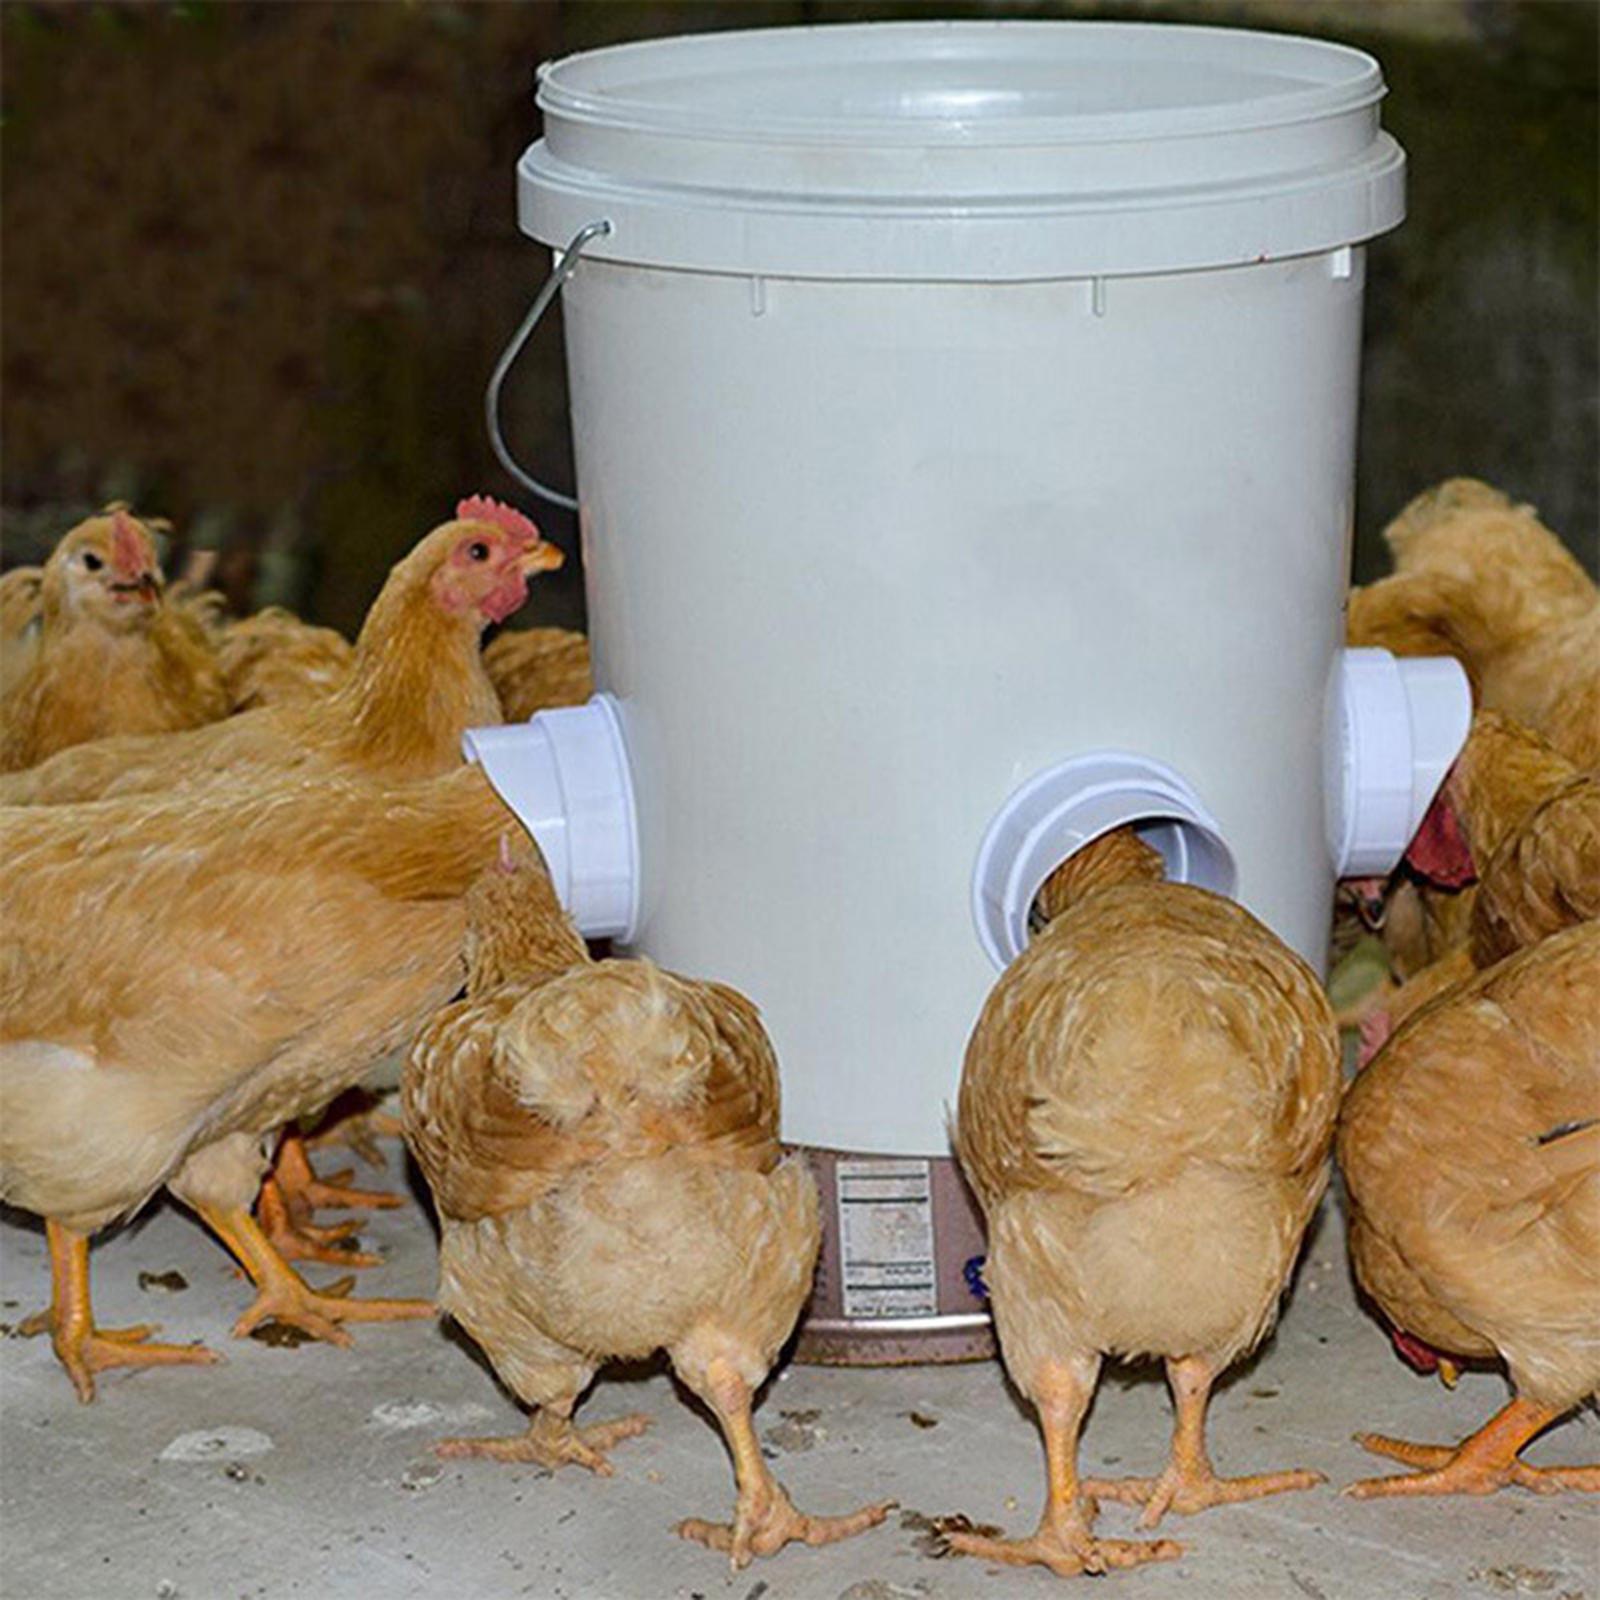 6 Pieces Automatic Poultry Feeder Reusable No Waste for Chicken Barrels Bins White